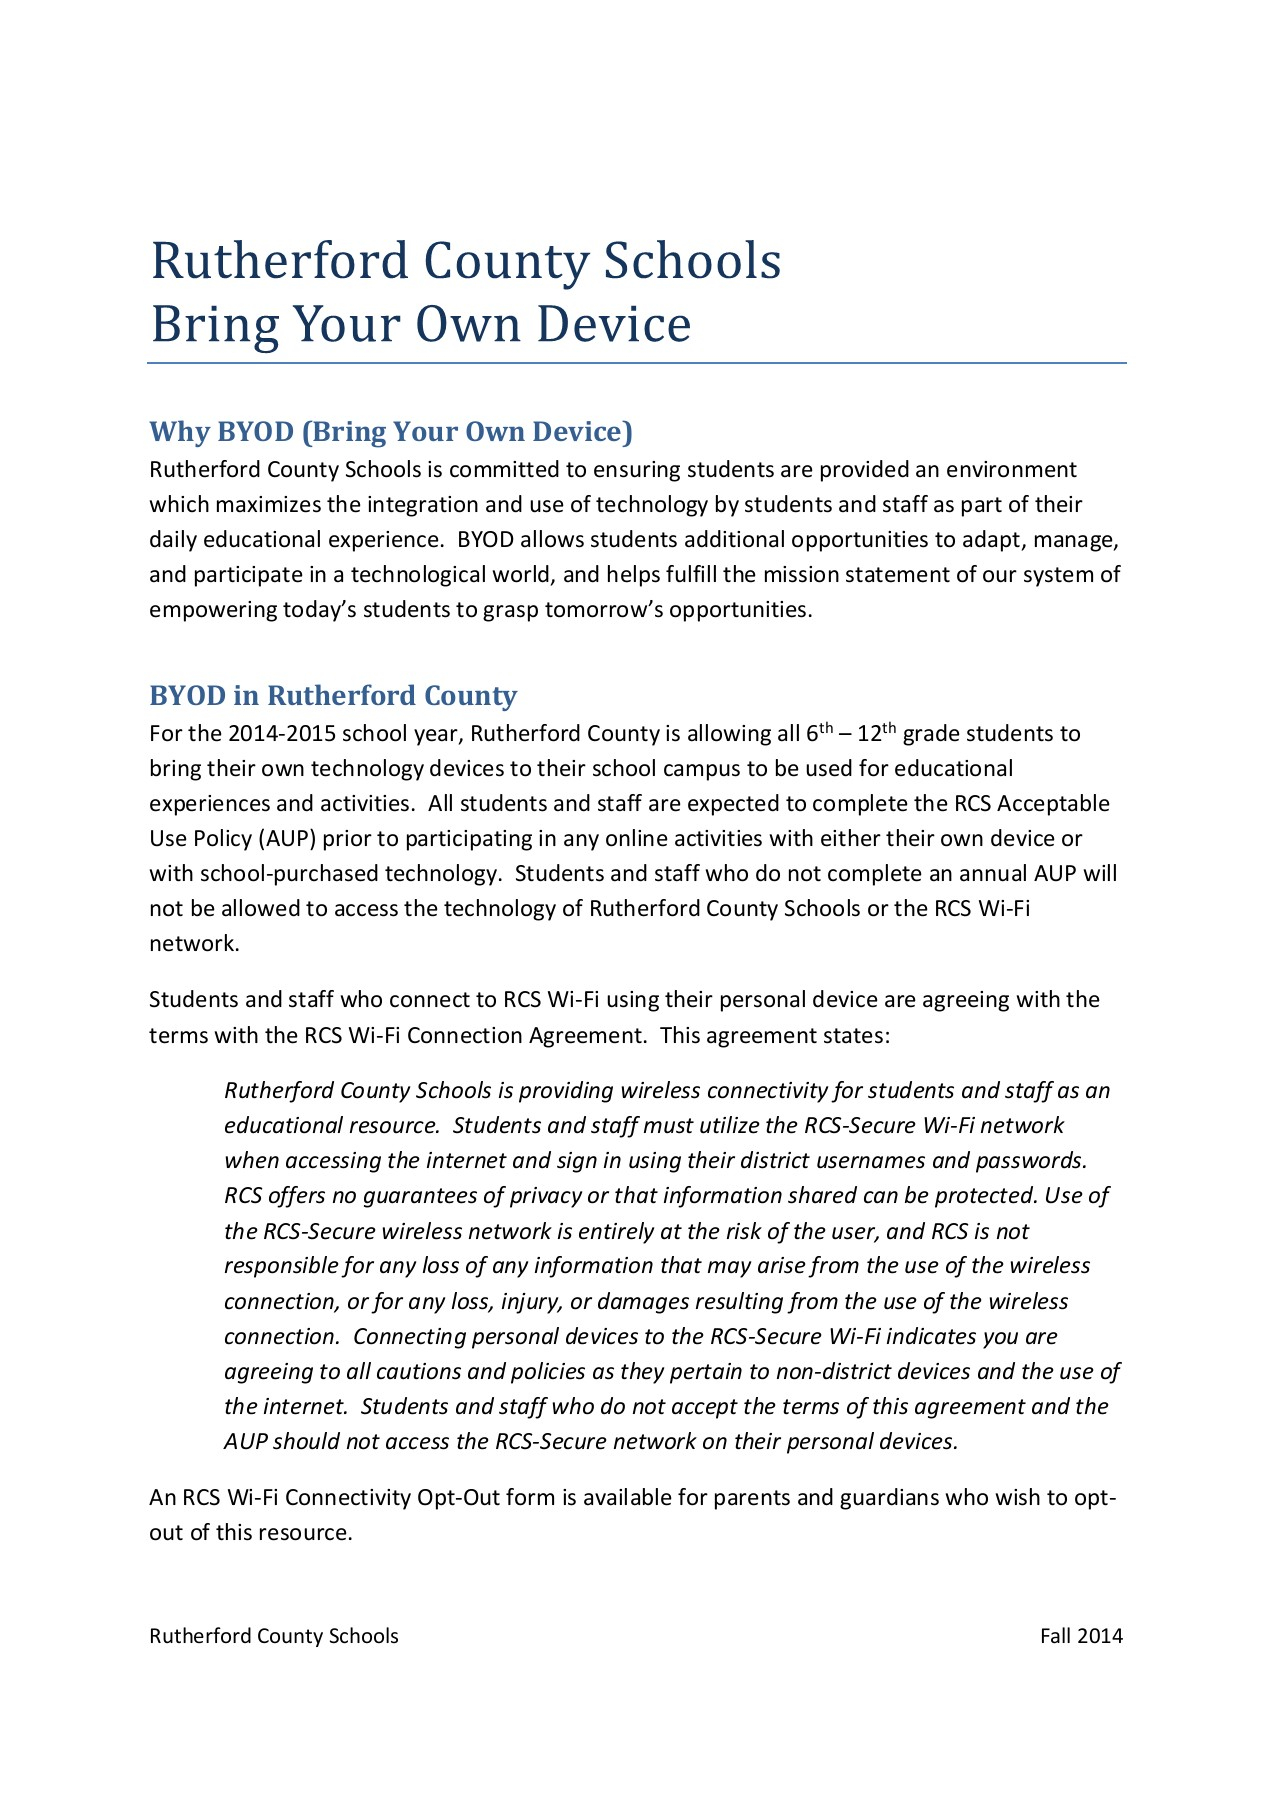 Byod Agreement Form Rcs Bring Your Own Device Od Policy Pages 1 6 Text Version